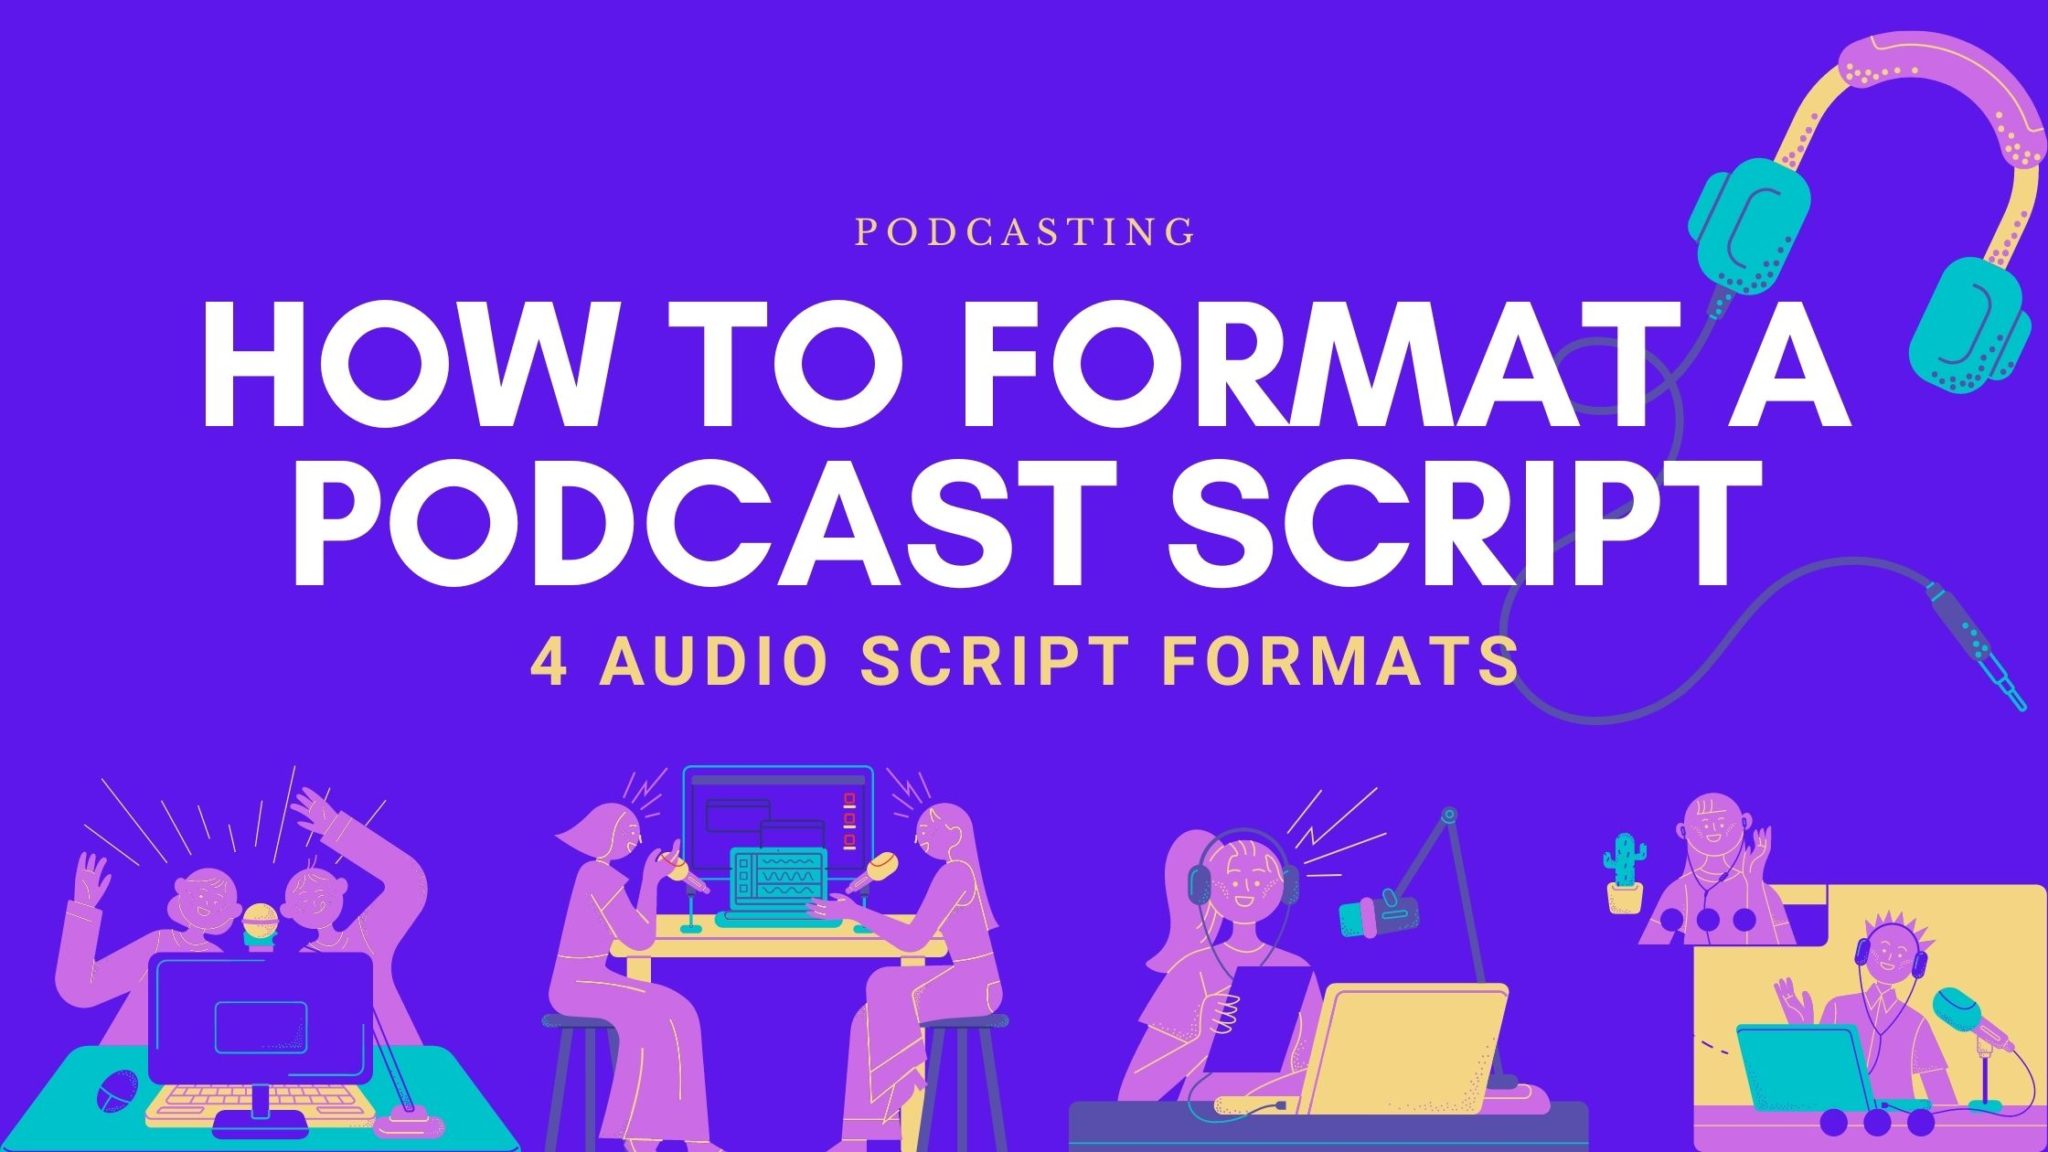 How to Write a Podcast: 20 Ways to Format a Podcast Script